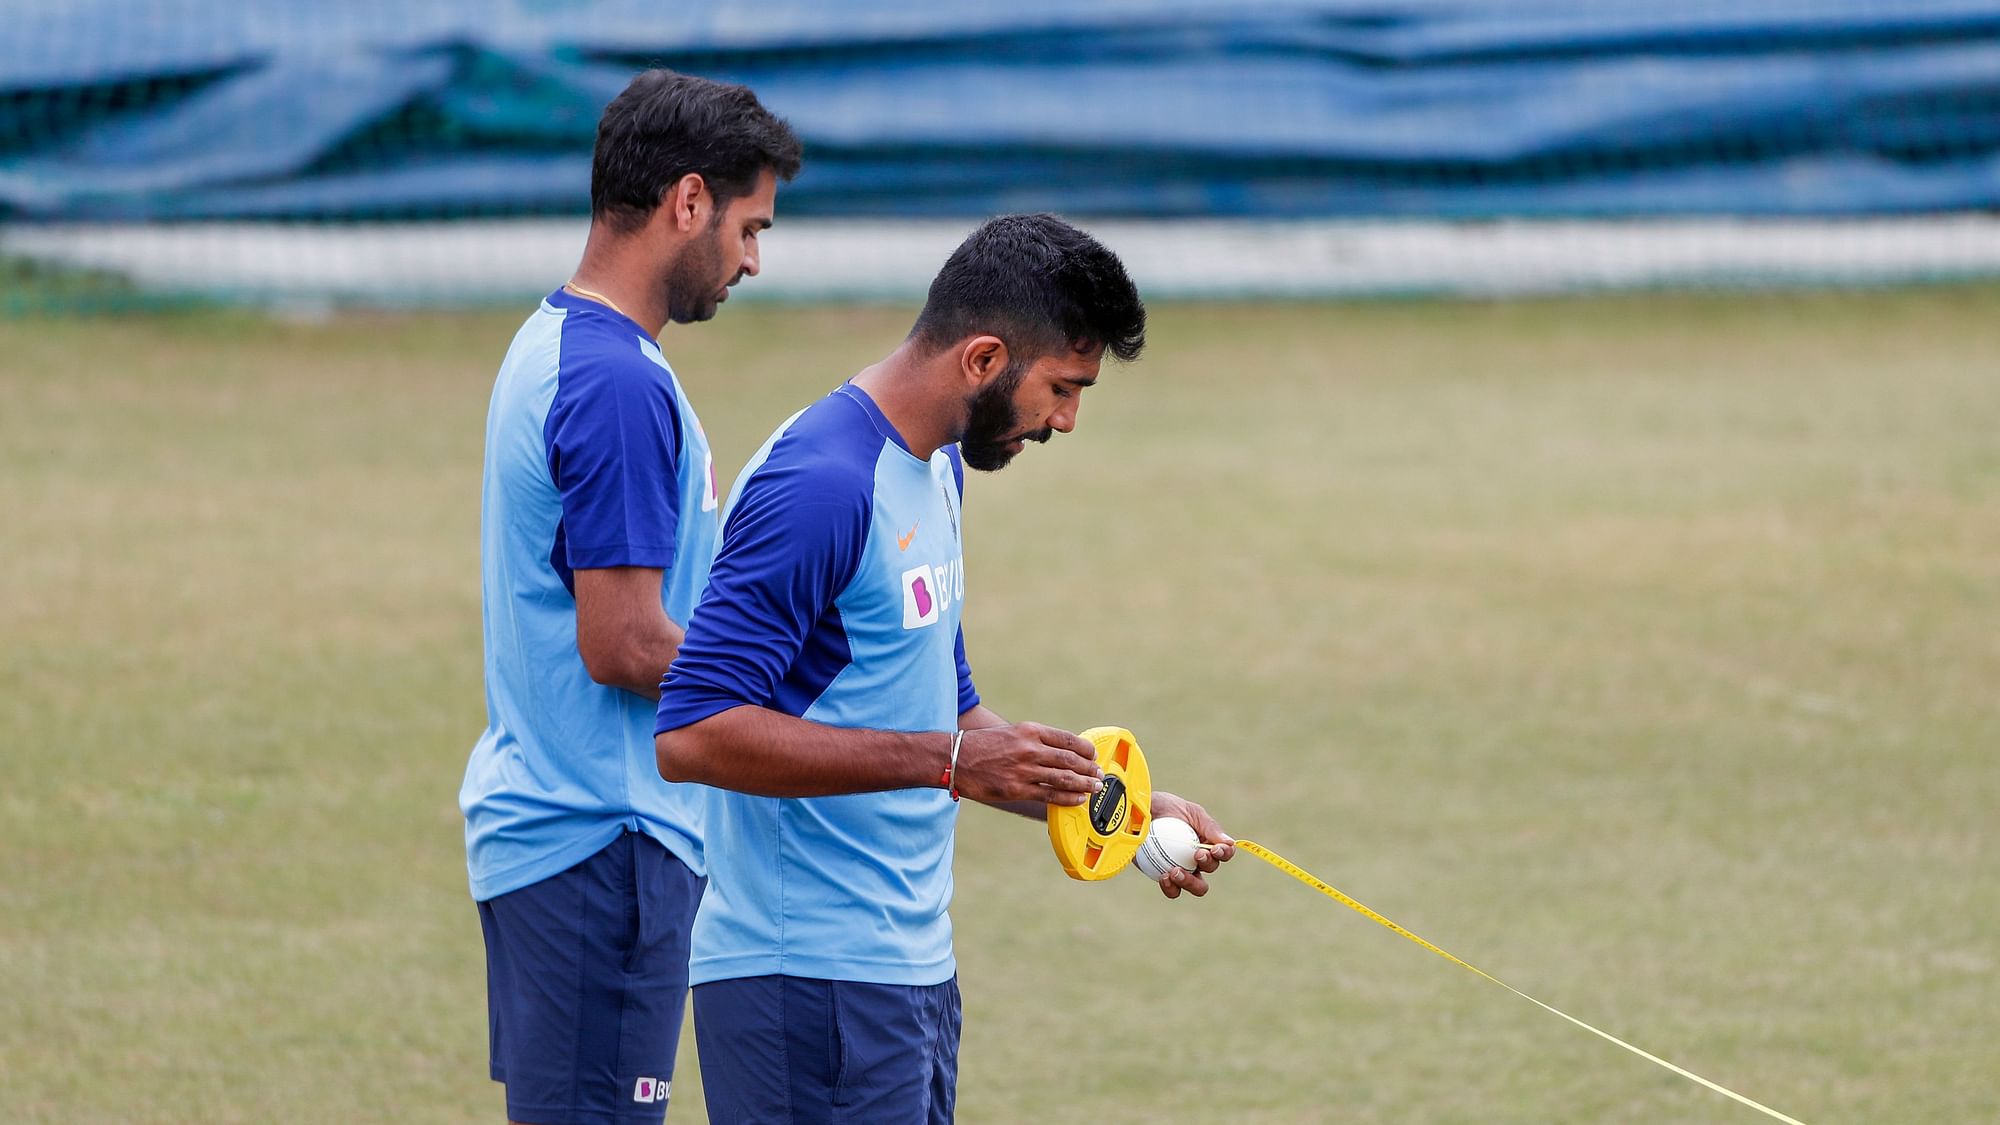 Indian bowlers may refrain from using saliva on the ball during the 1st ODI vs South Africa on Thursday.